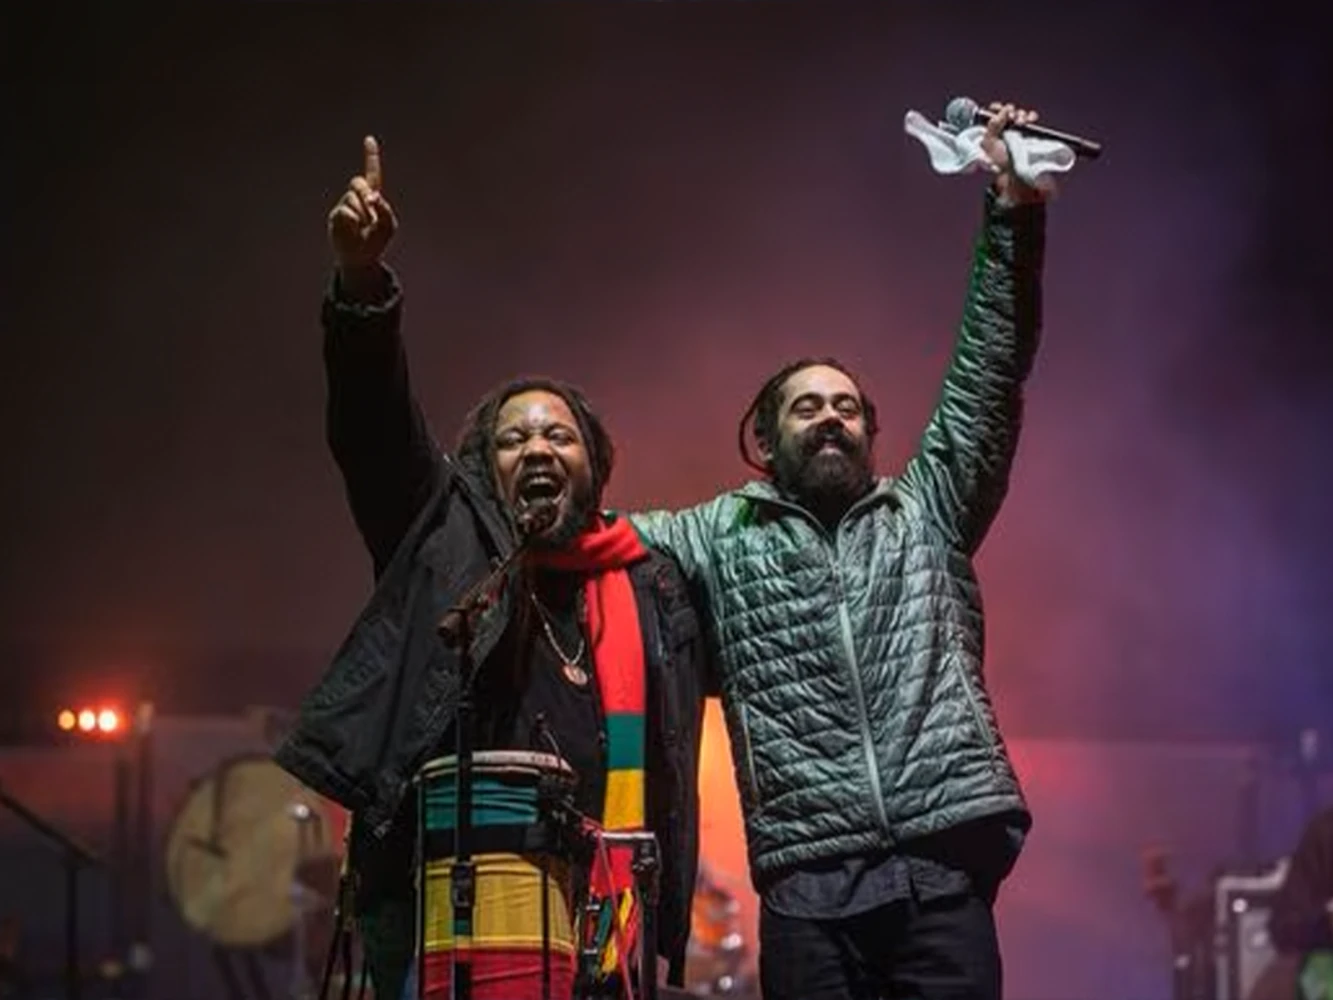 Reggae Night XXII: Jamrock Reggae Night at the Bowl, Damian “Jr. Gong” Marley and Stephen Marley: What to expect - 1